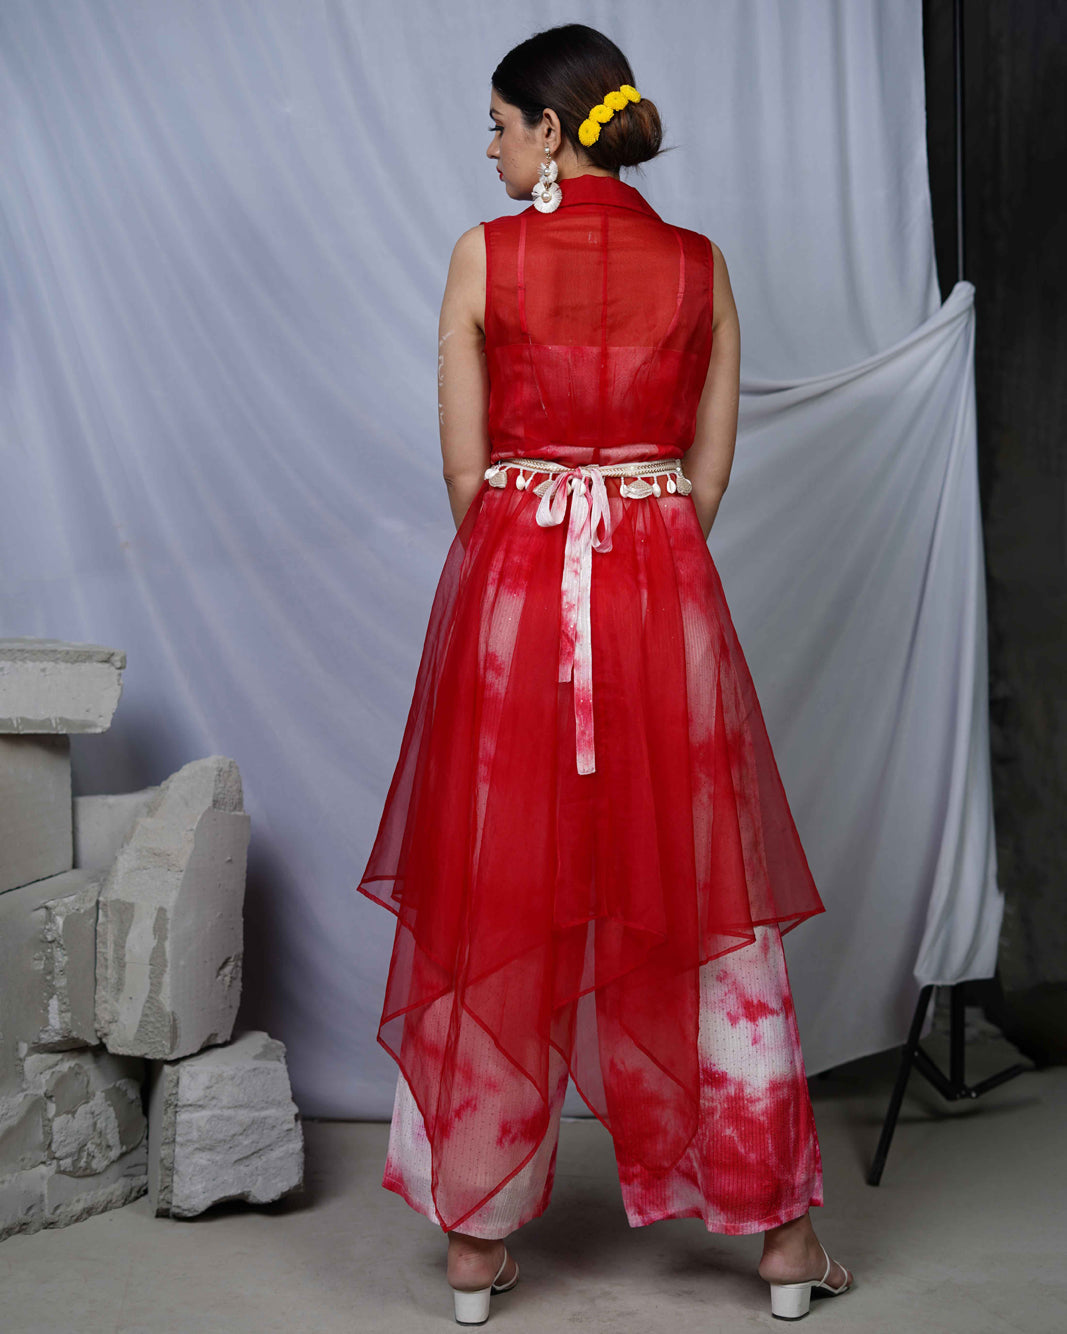 Pyaar Red Tie and Dye Womens Indo Western Party Co-ord Set with Organza Cape and Embellished Belt